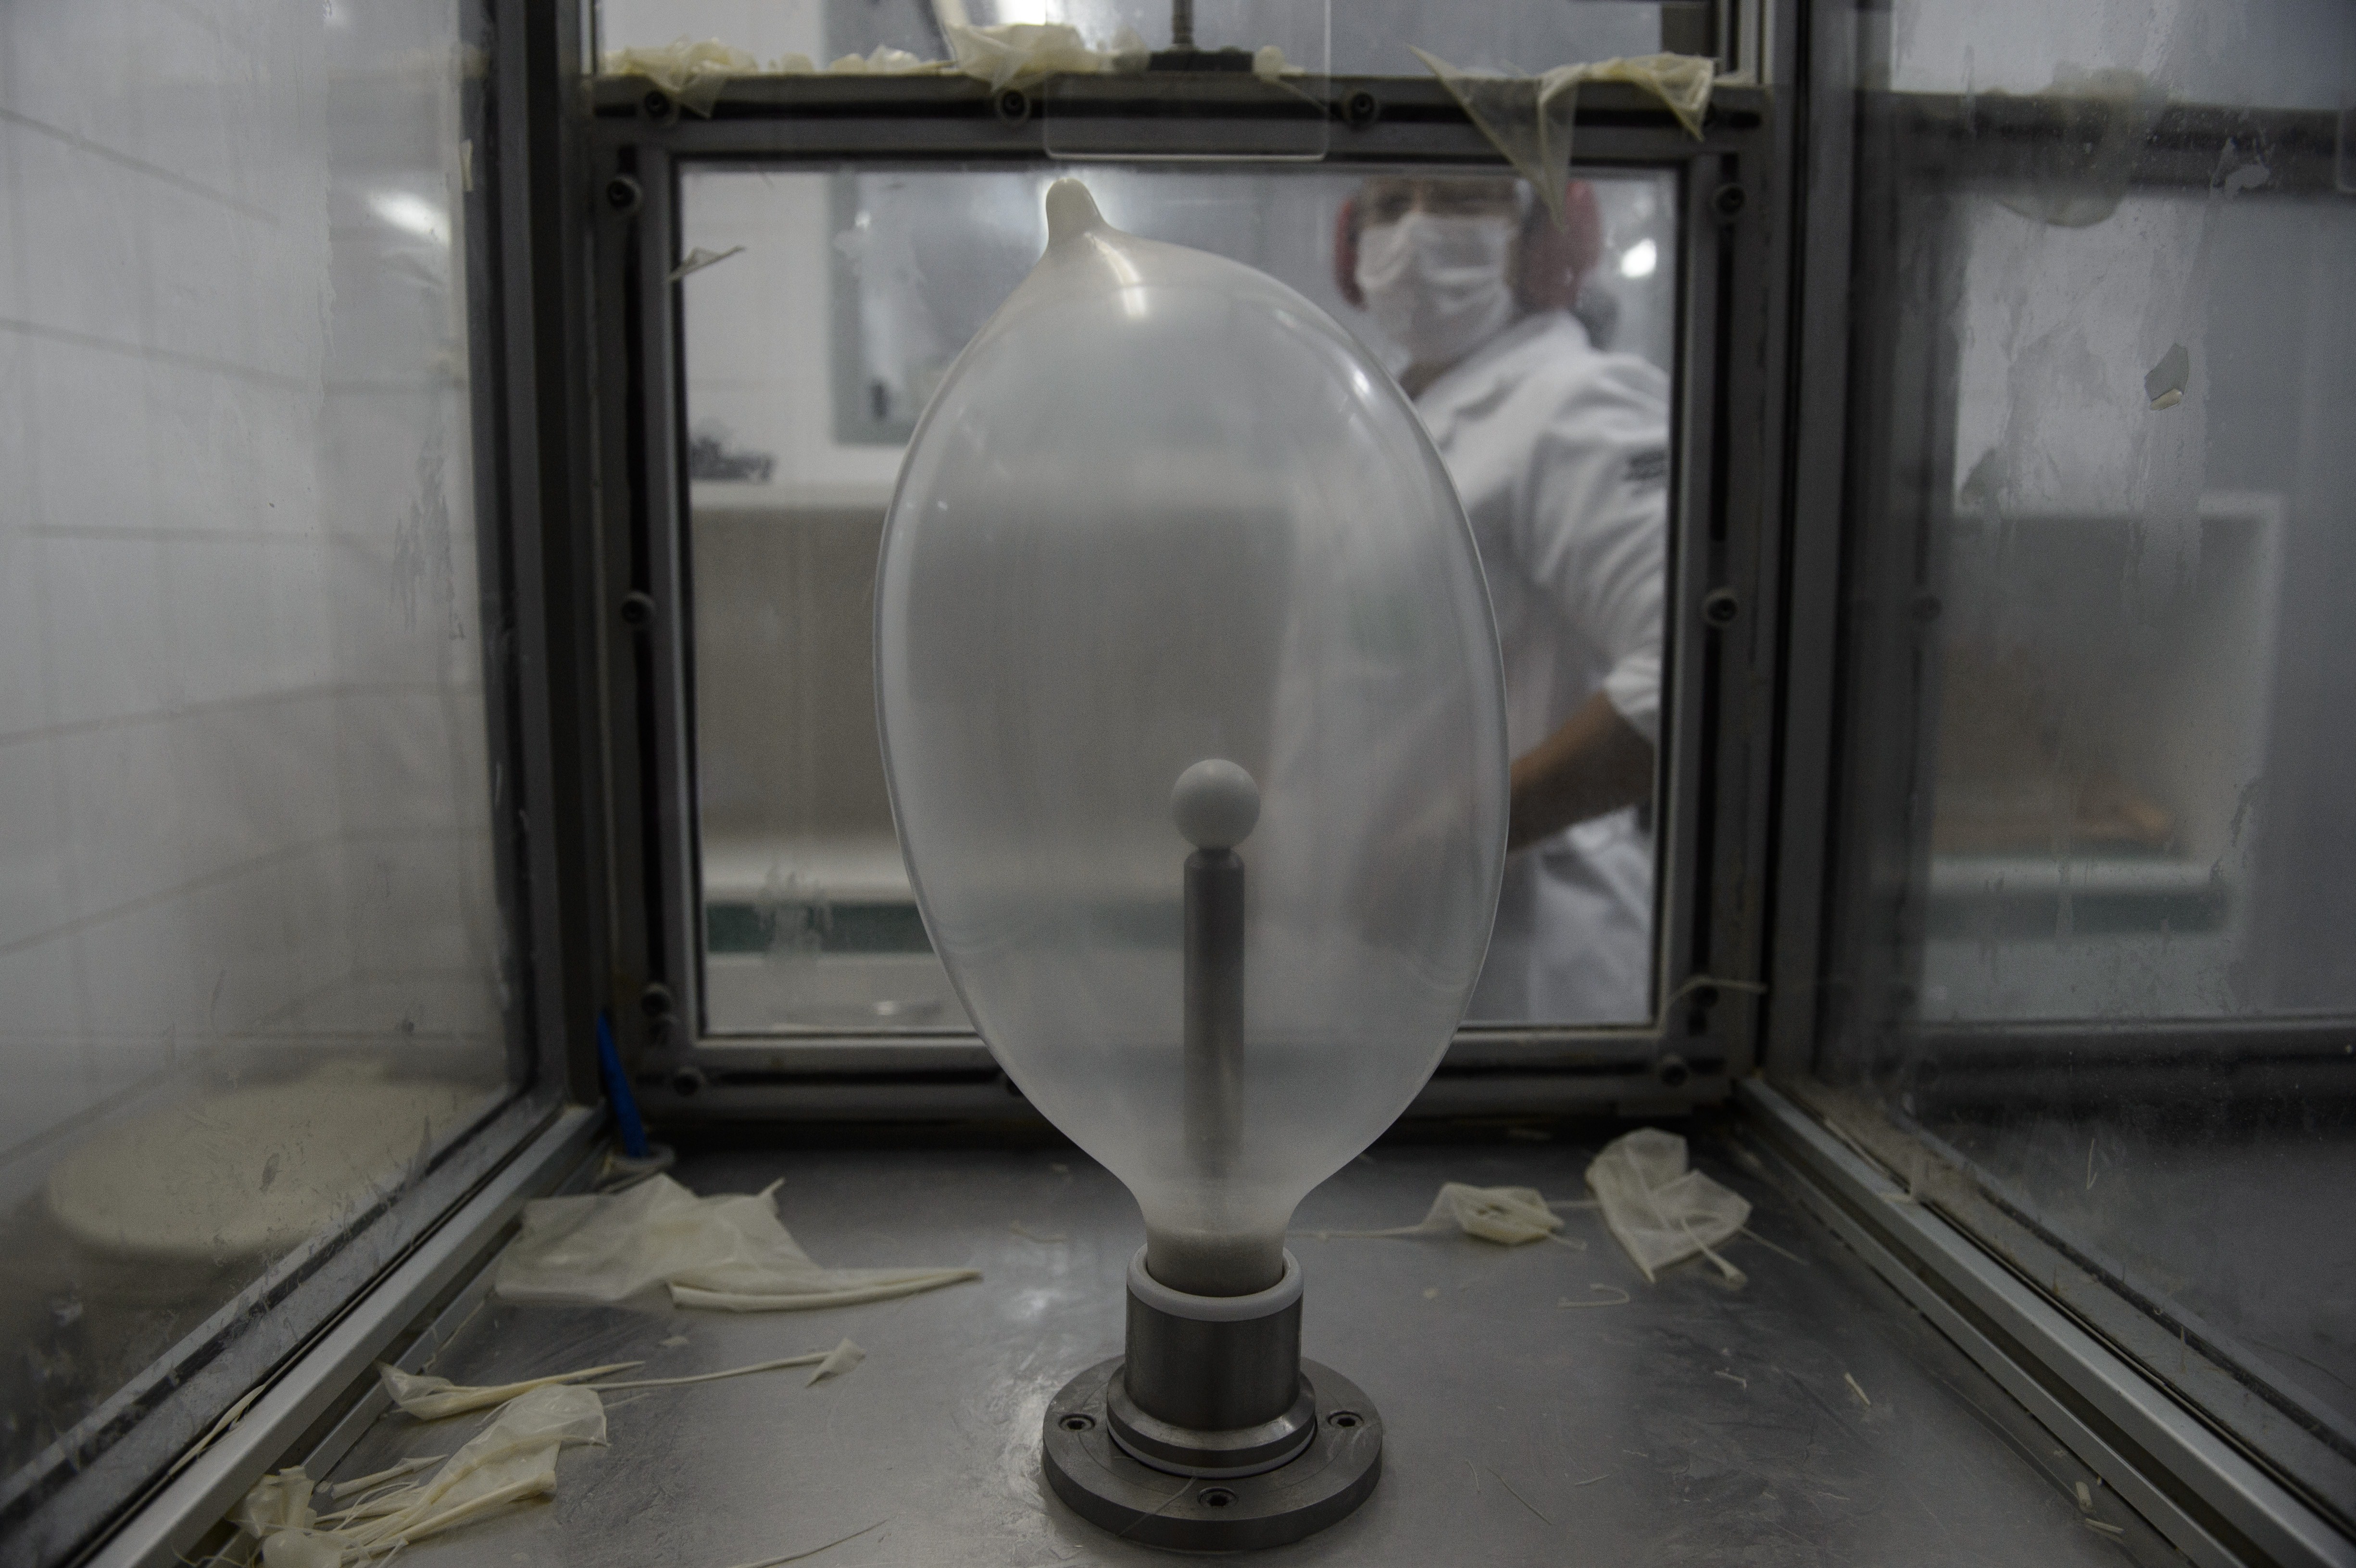 Samples of condoms are tested by inflating them in a chamber at the Natex factory in Brazil